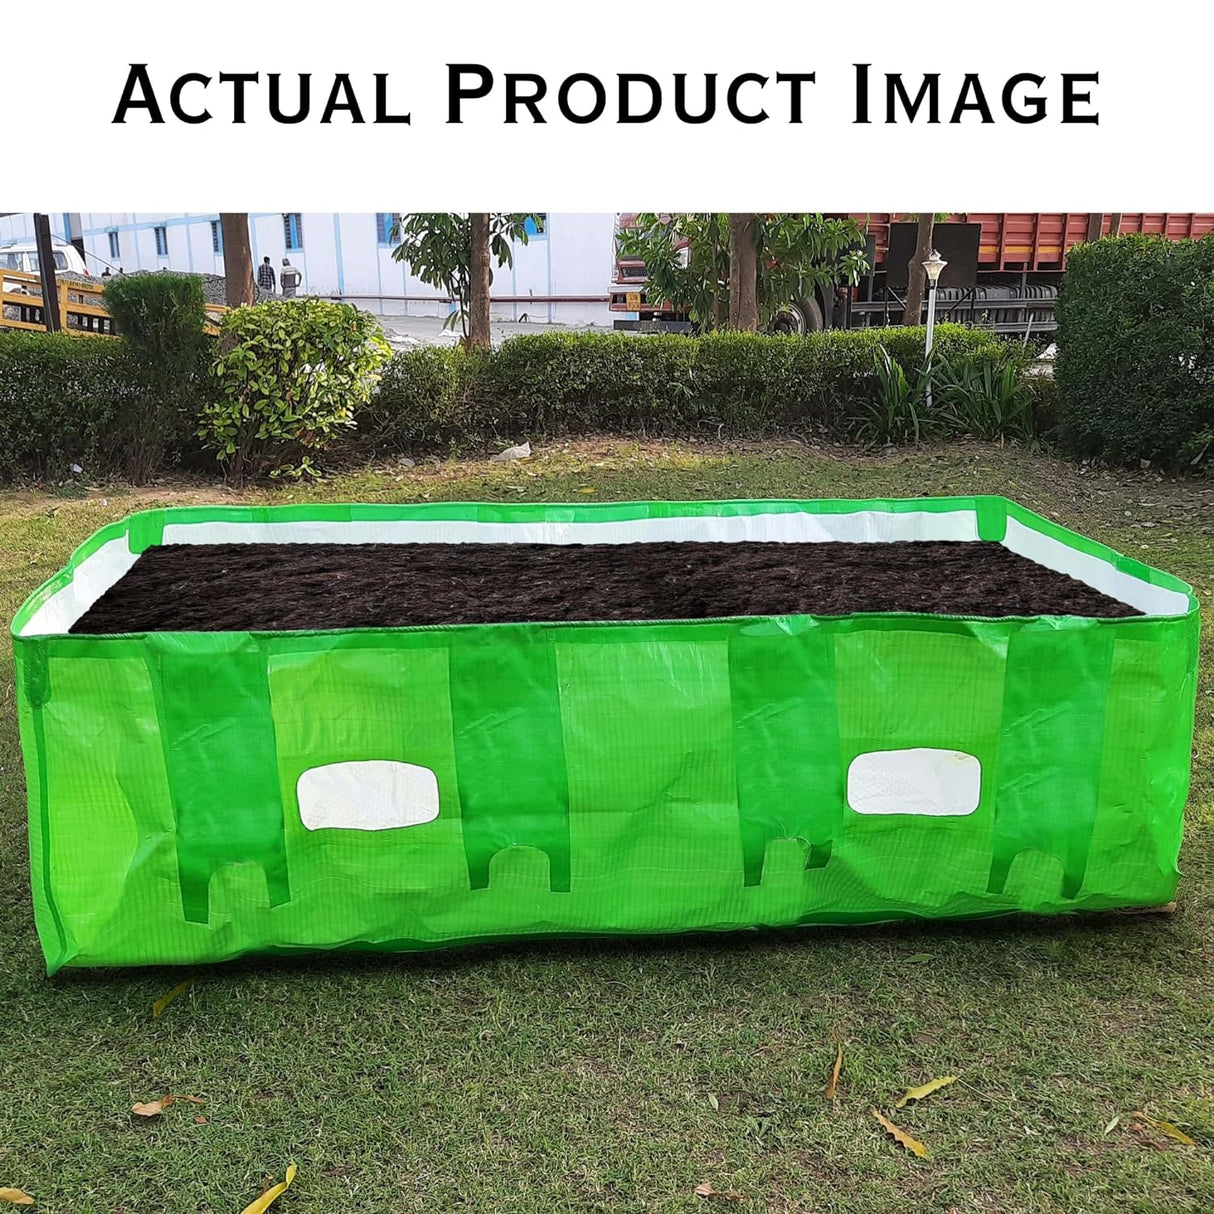 Singhal HDPE UV Stabilized Vermi Compost Bed 360 GSM, 8x4x2 Ft, 100% Virgin Quality Material, Green and White, Vermibed Agro Vermicompost Bed (Vermi Bed), Agro Vermi Compost Making Bed